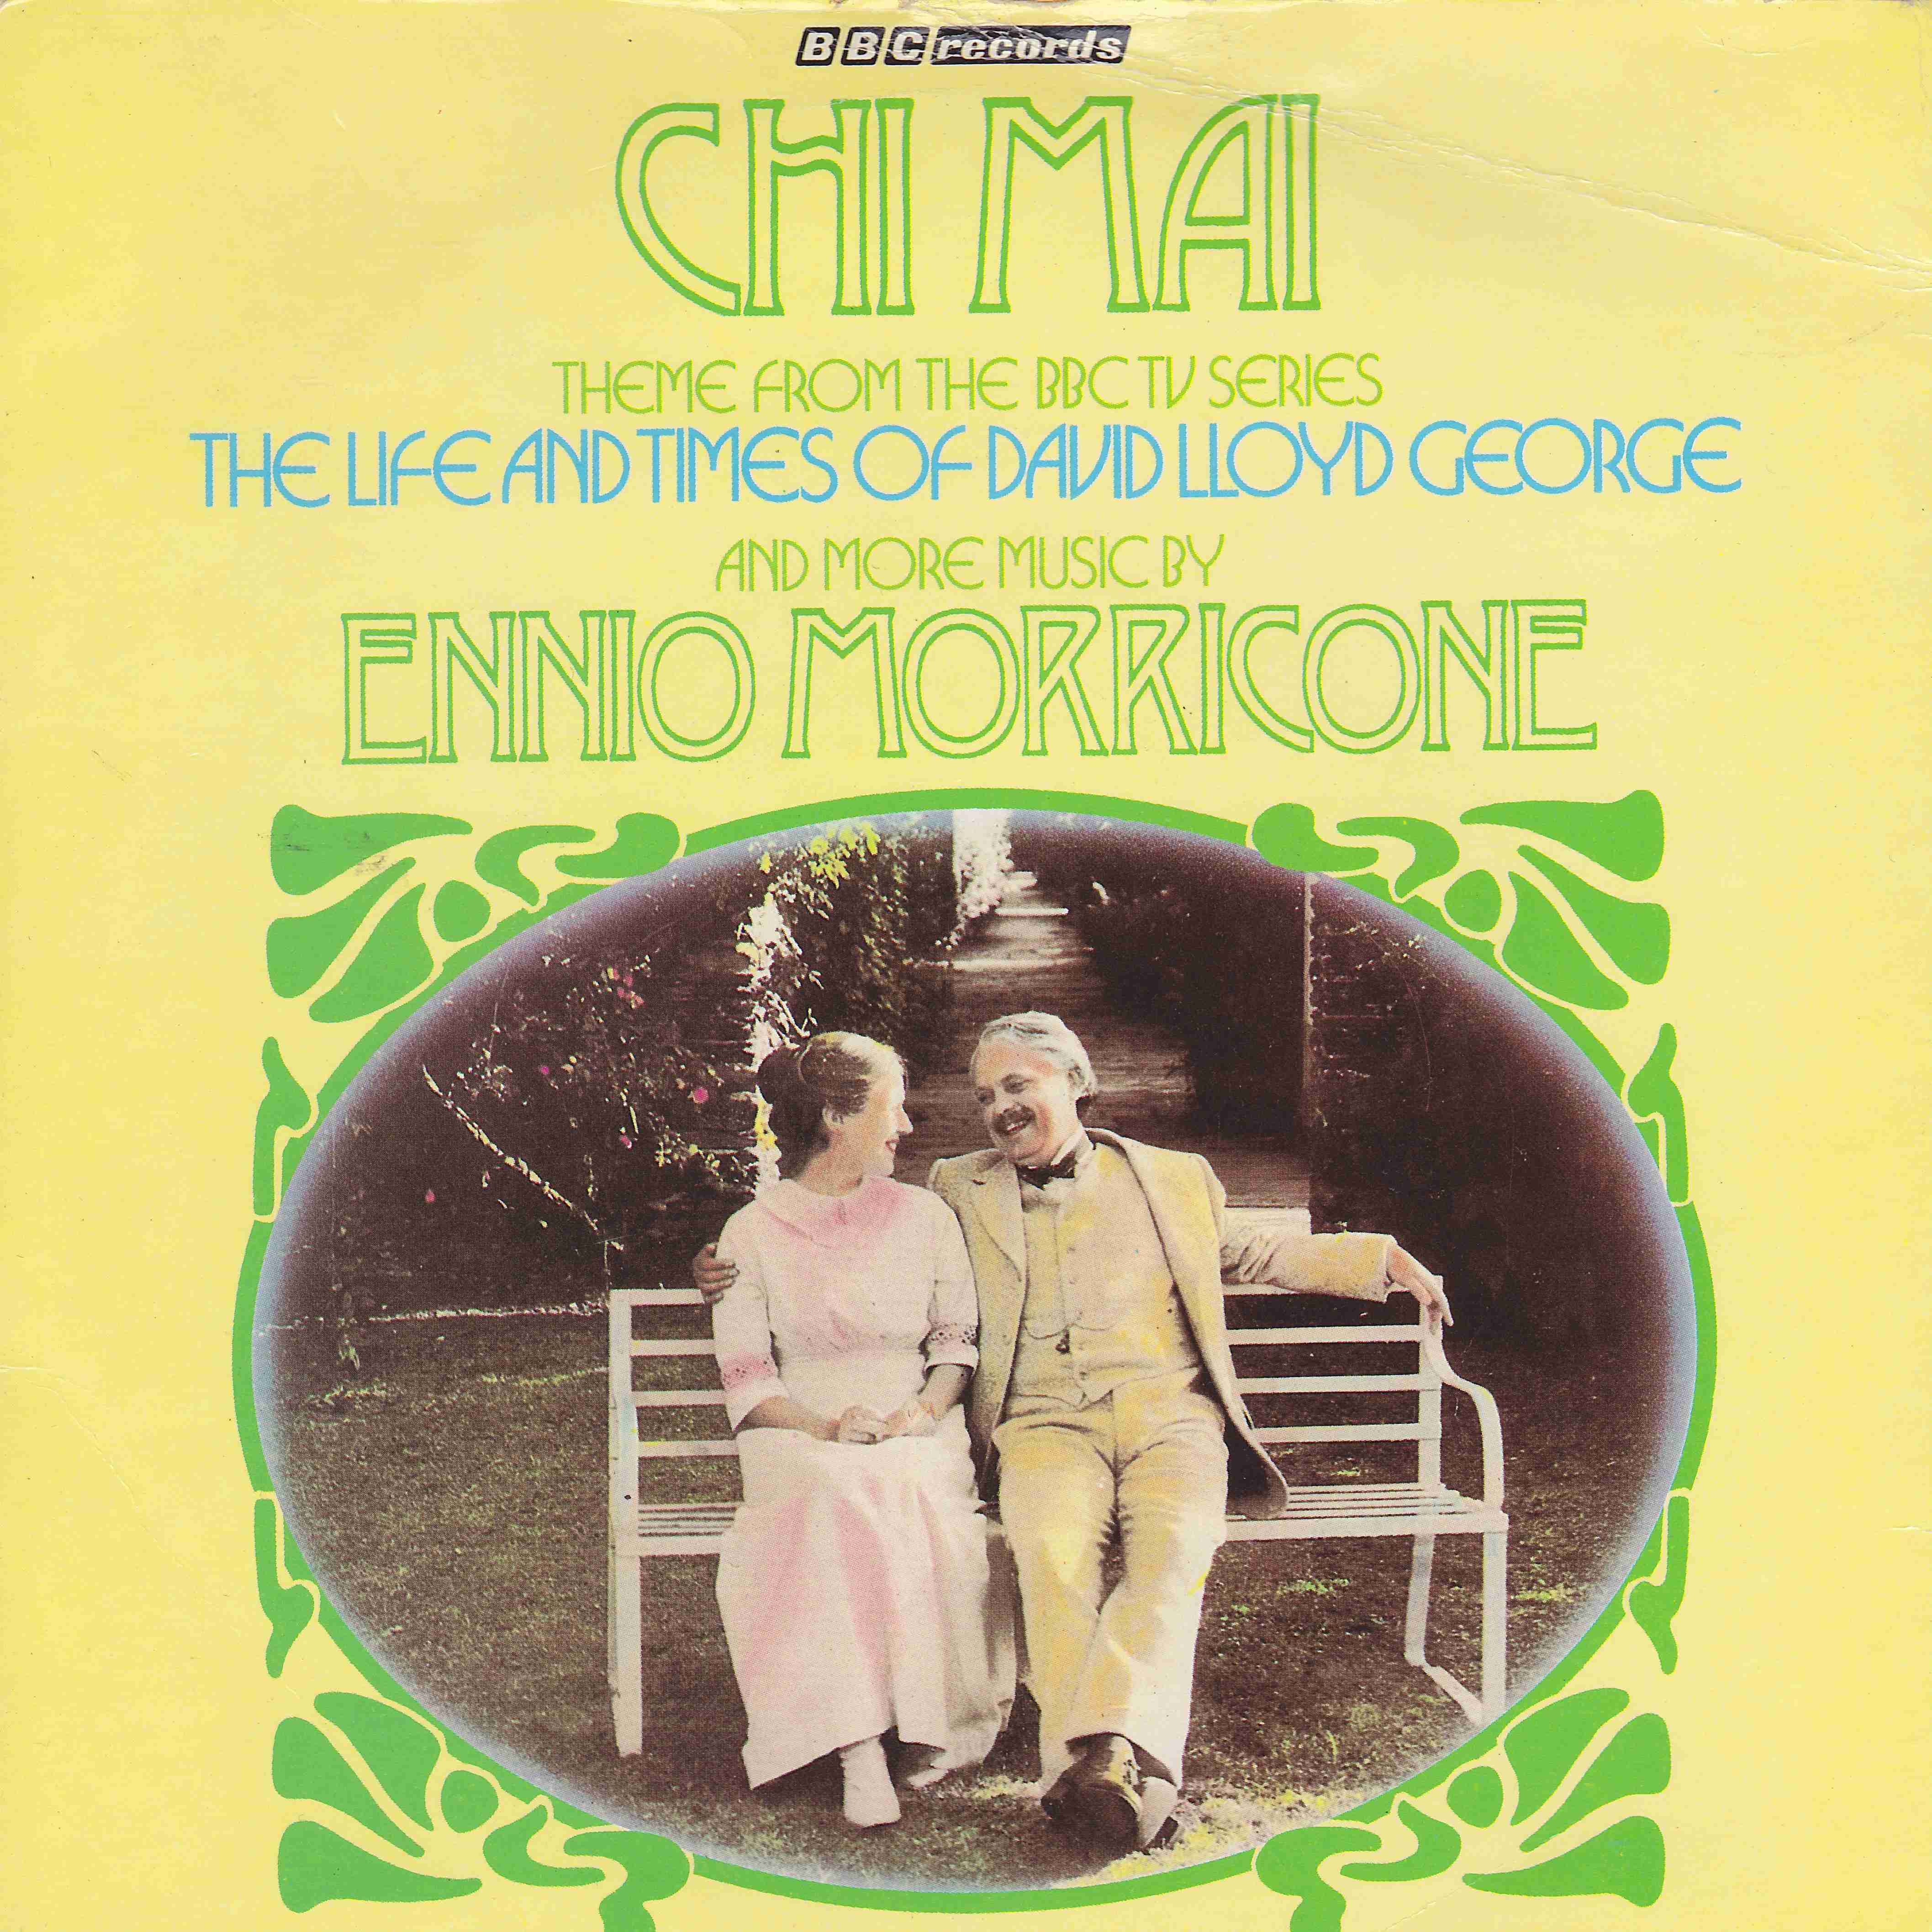 Picture of RESL 92 Chi mai (The life and times of David Lloyd George) by artist Ennio Morricone from the BBC singles - Records and Tapes library